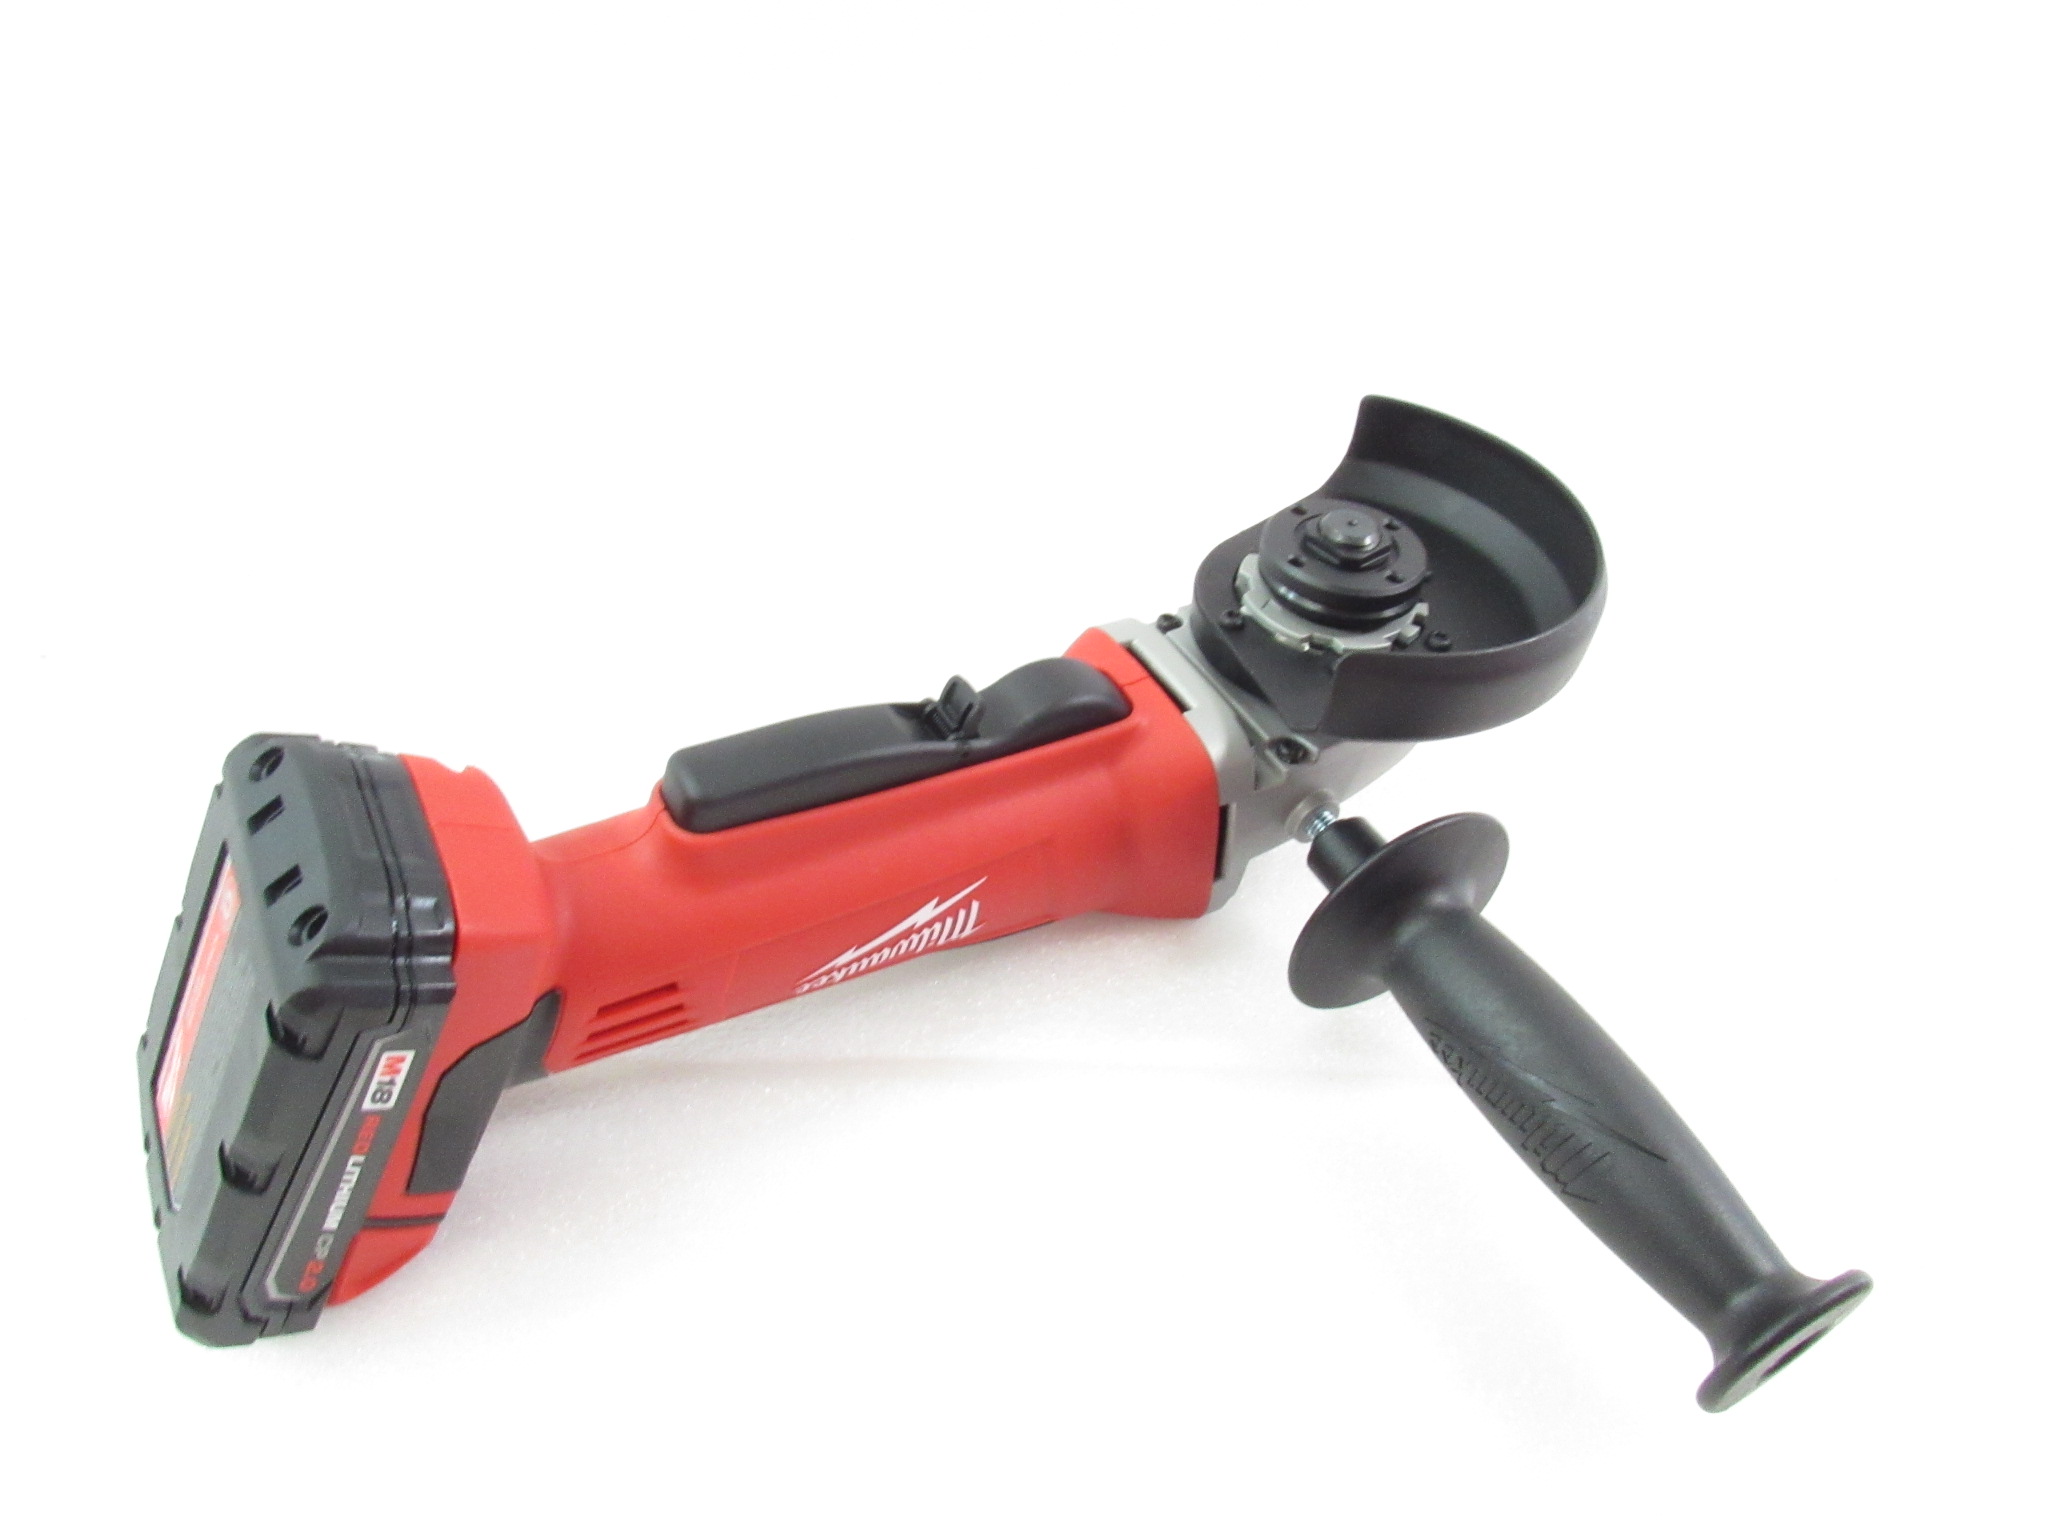 Milwaukee Electric Tools Meuleuse Cut-Off M18 4-1 / 2In 2680-20